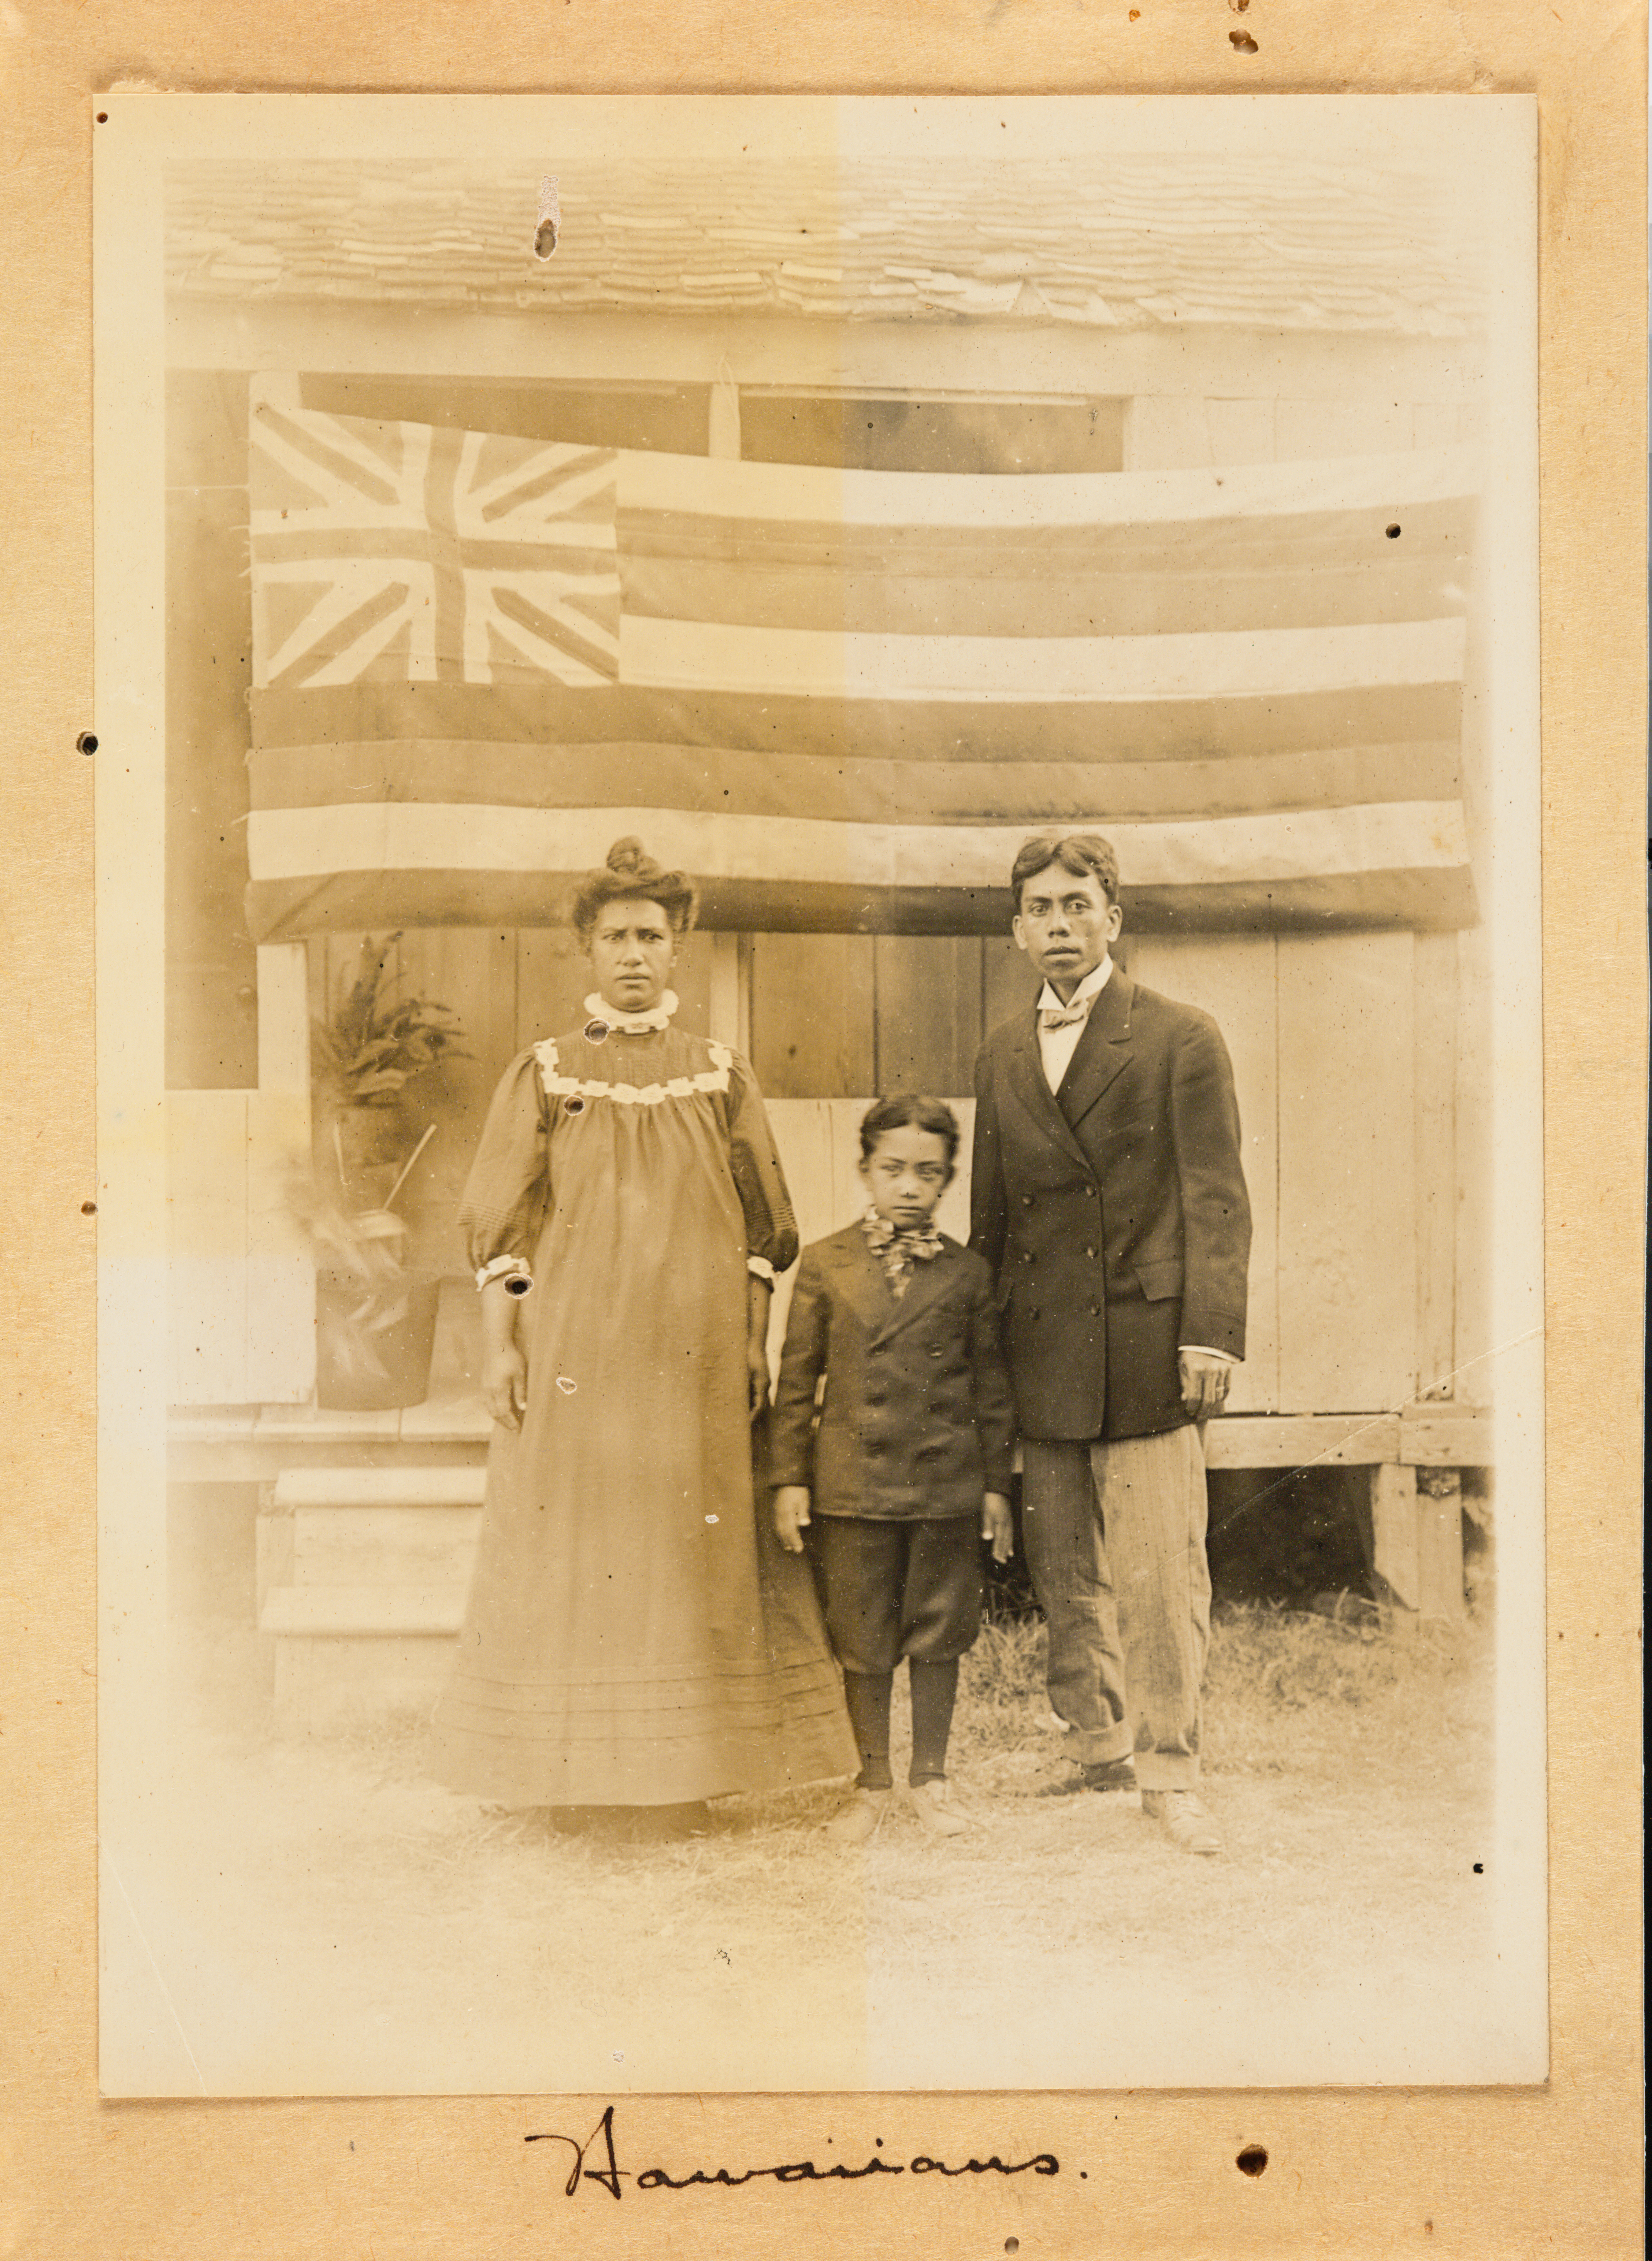 A Hawaiian man, woman, and boy pose for a photograph wearing Western clothing. Behind them hangs the flag of the Kingdom of Hawaii. Manuscript text below the image reads: Hawaiians.